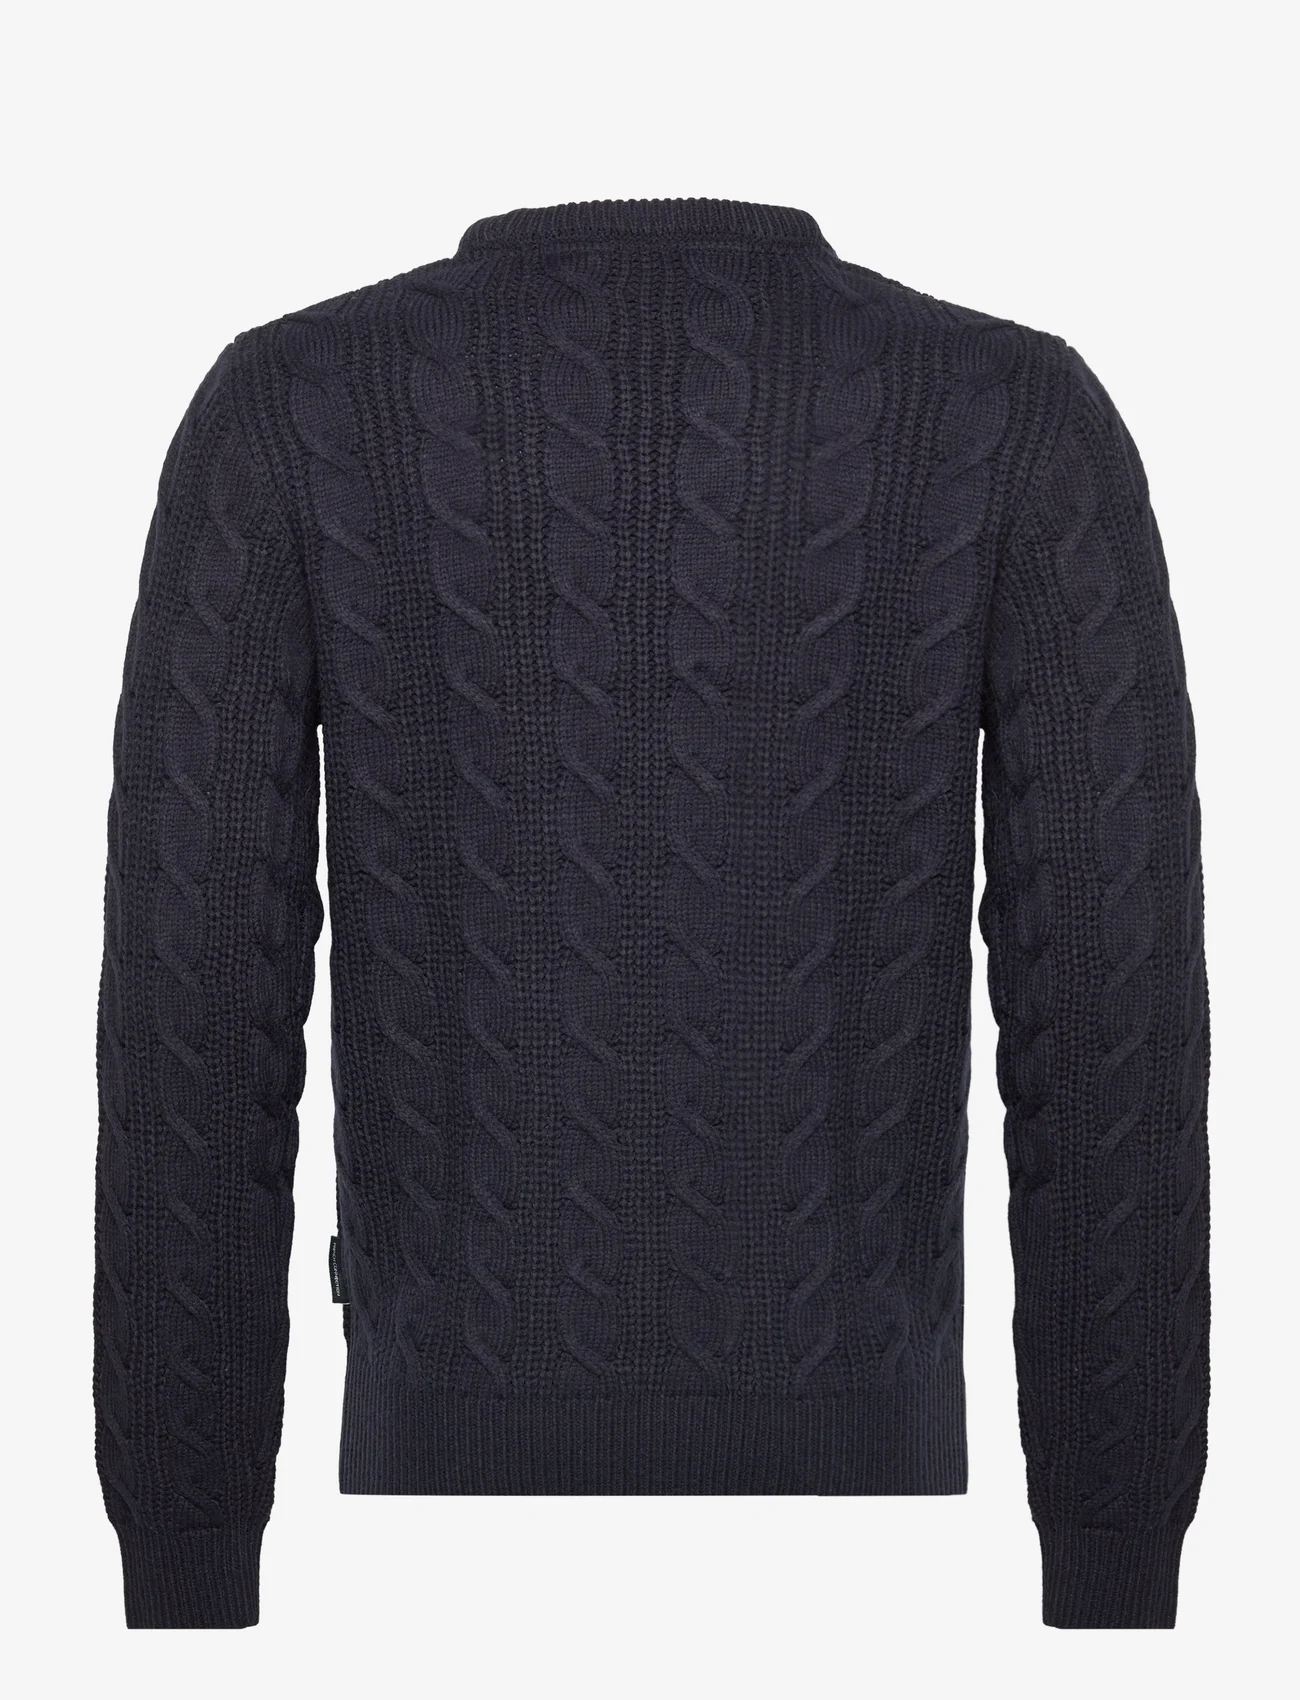 French Connection - CREW CABLE 2 mr - knitted round necks - dark navy - 1